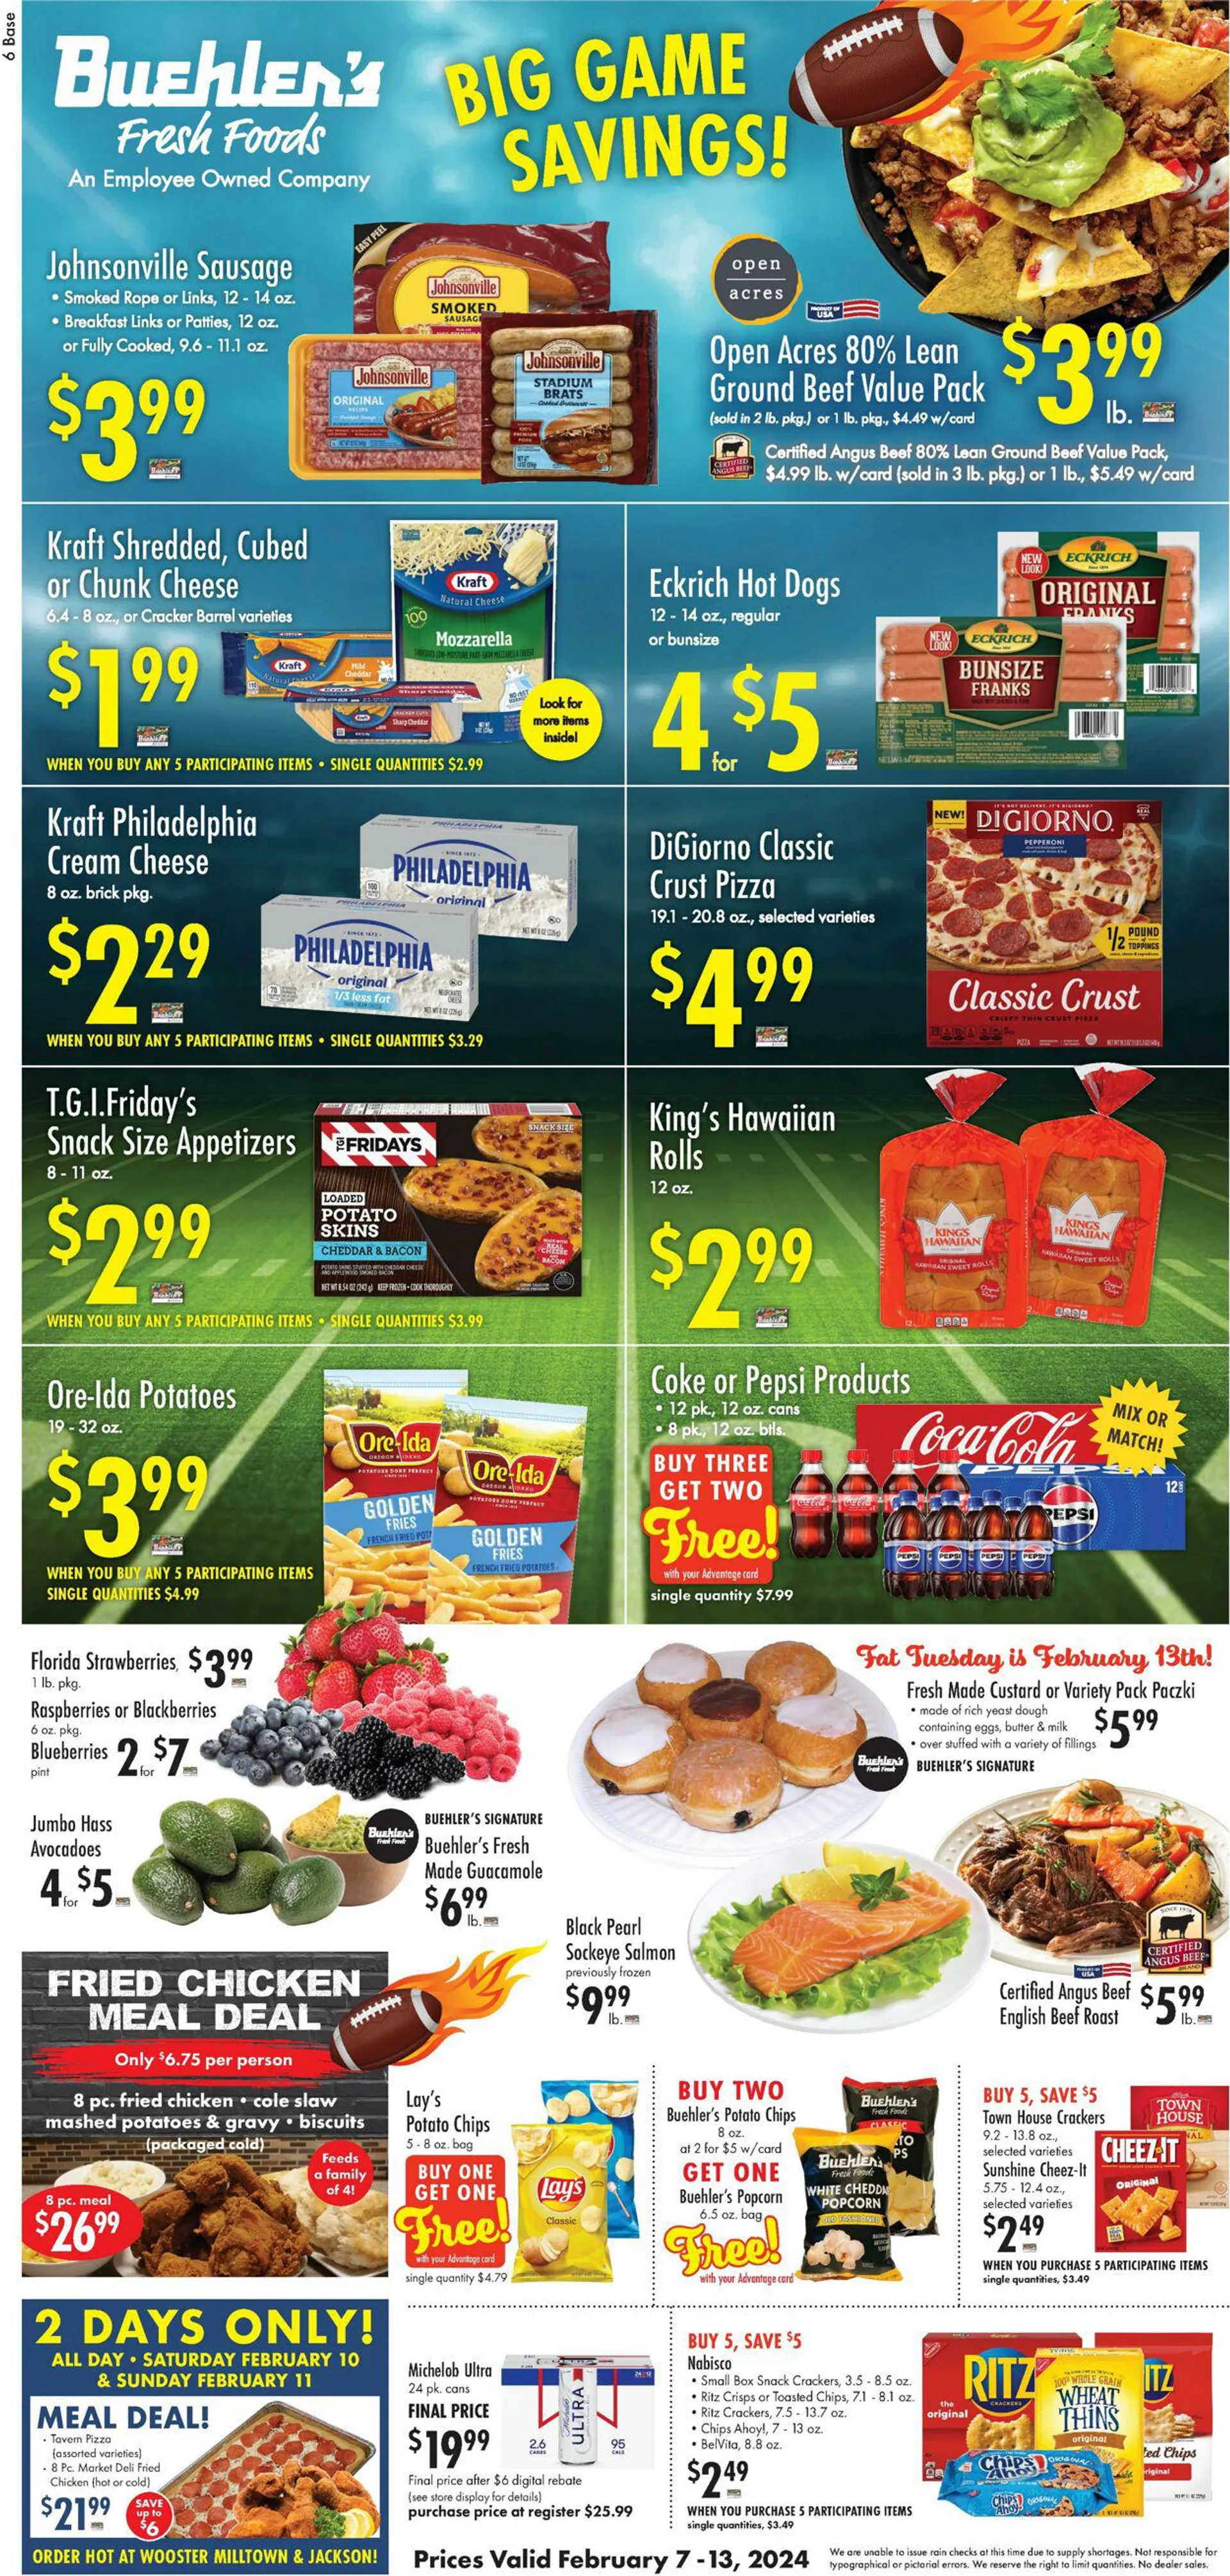 Weekly ad Buehler's Fresh Food from February 7 to February 13 2024 - Page 